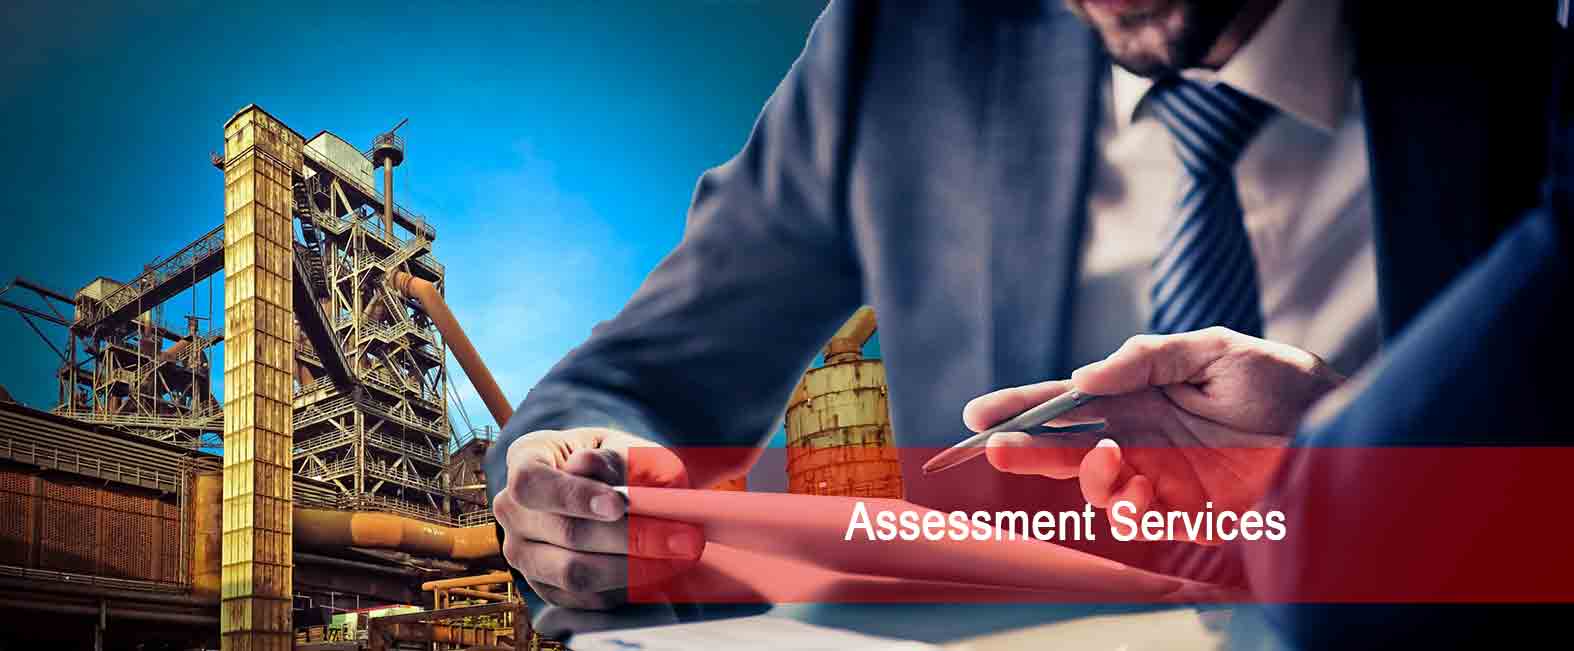 Assessment Services new